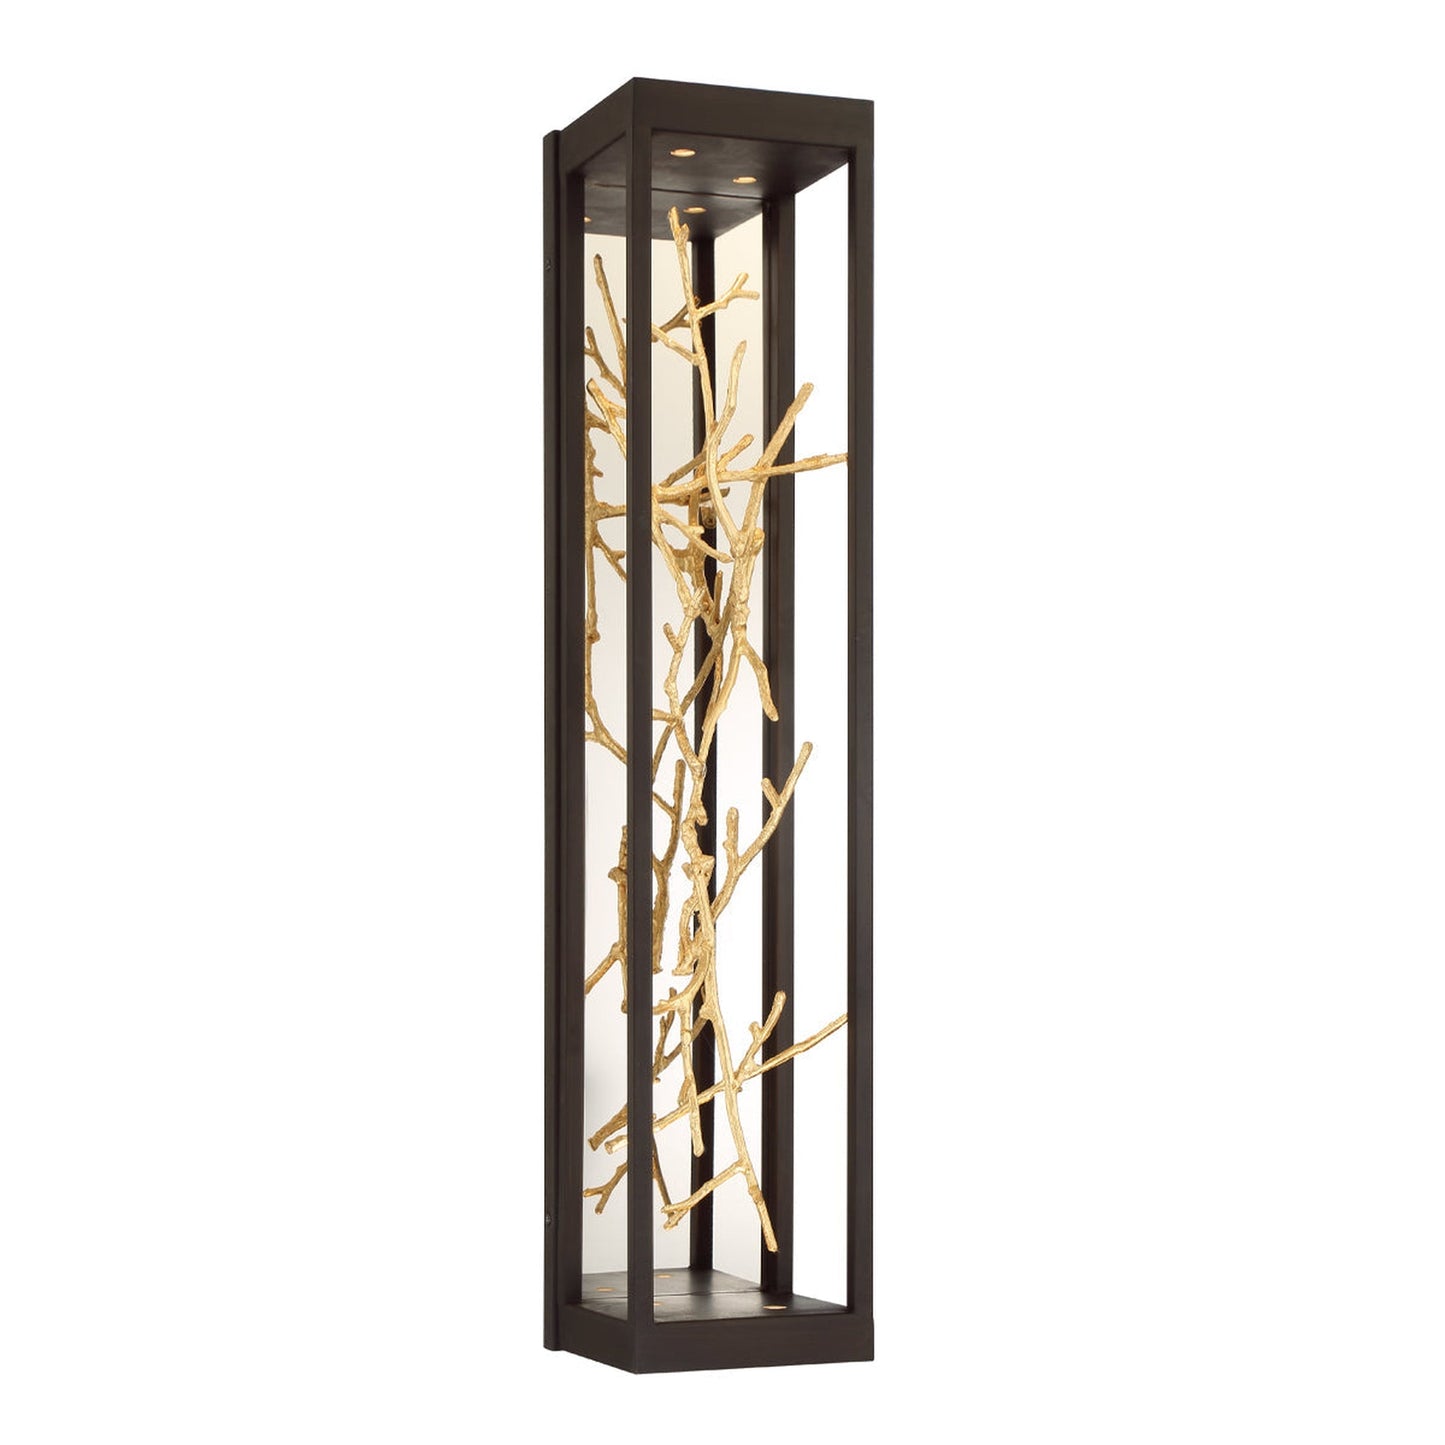 Eurofase Lighting Aerie 30" 4-Light Dimmable Integrated LED Rectangular Bronze Open-Cage Framed Wall Sconce With Gold Free-Flowing Gilded Branch Accents